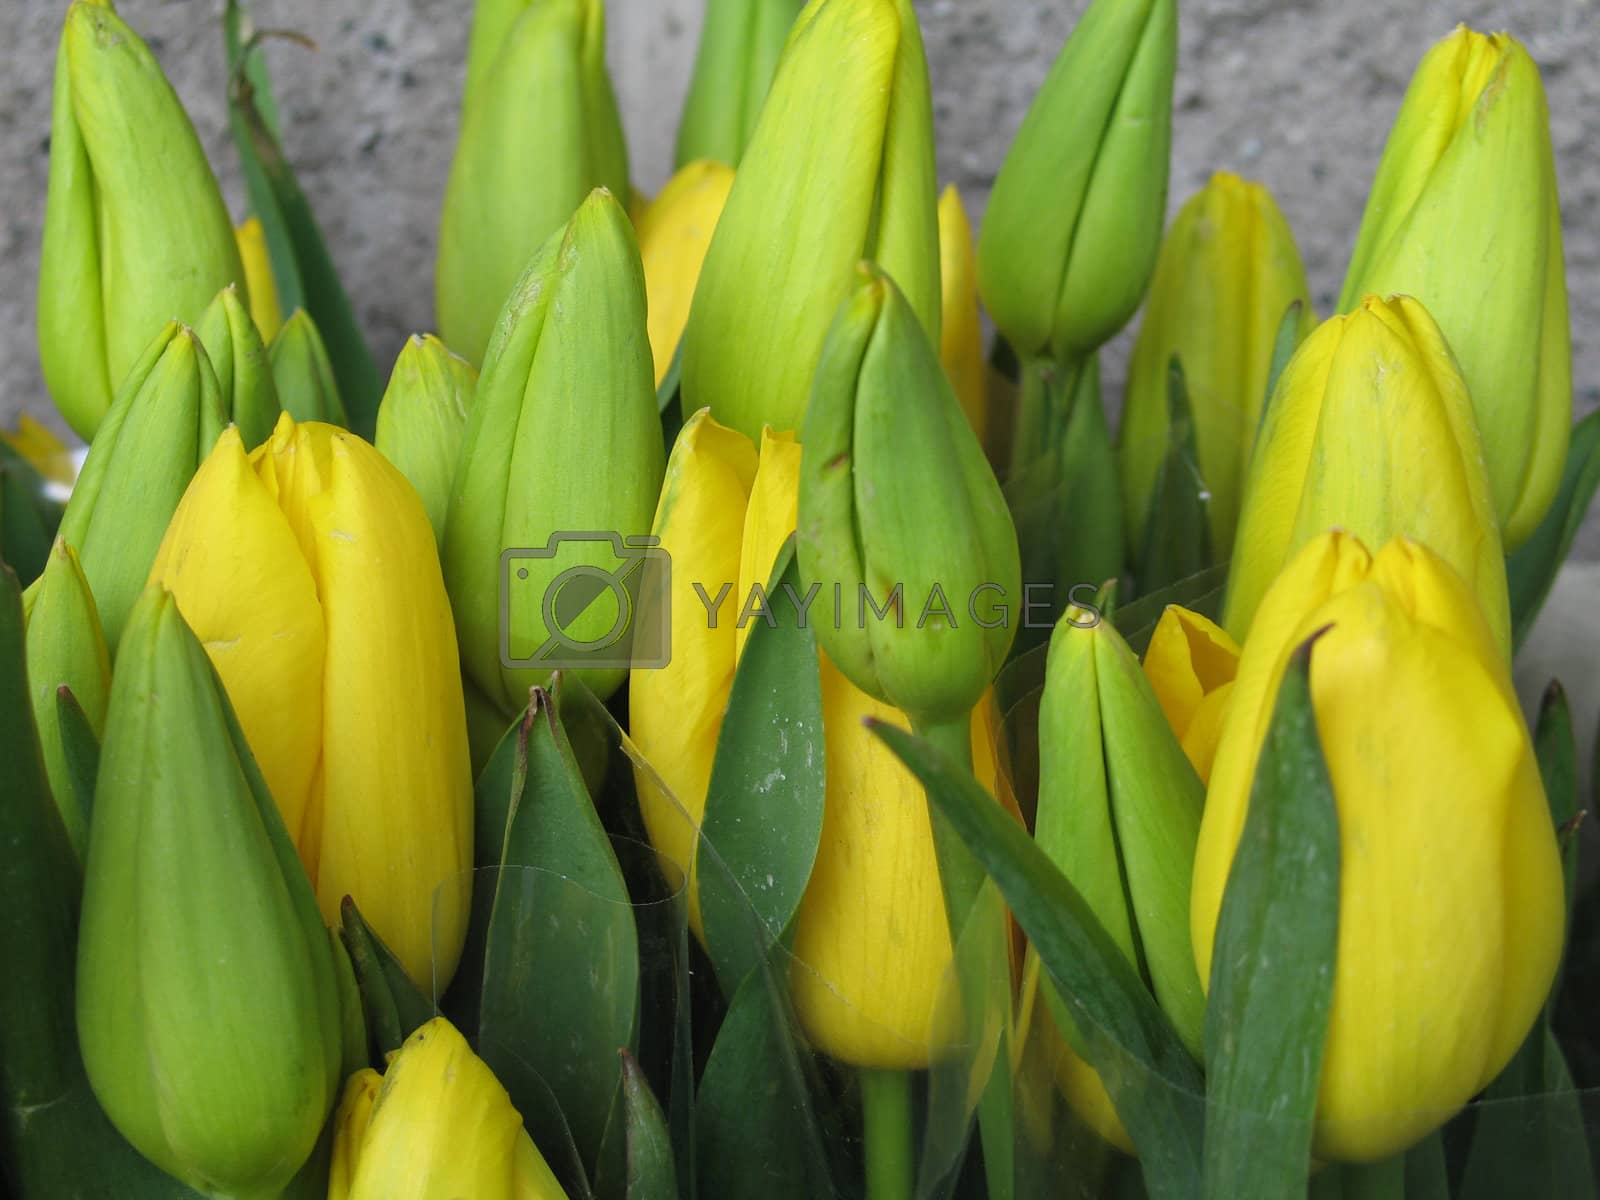 Royalty free image of yellow tulips by mmm